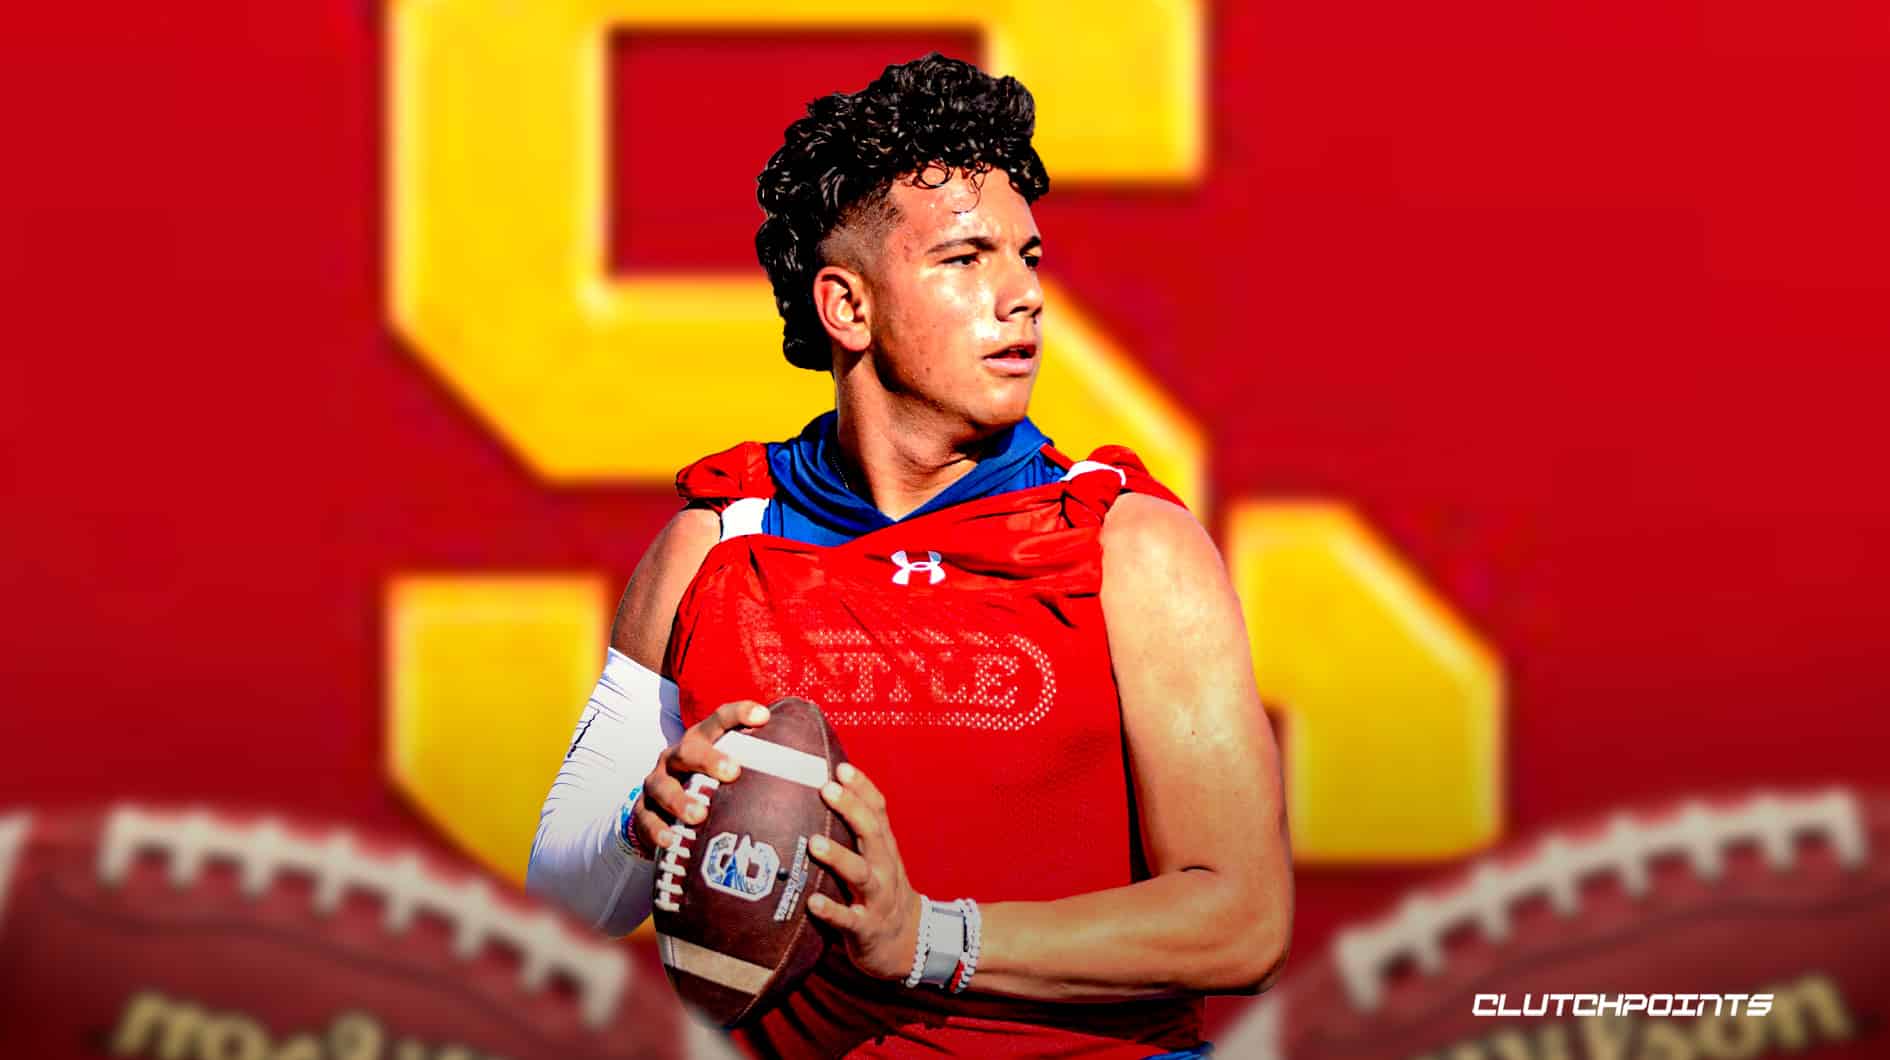 Dylan Raiola, 5-star Ohio State decommit, to visit with USC football